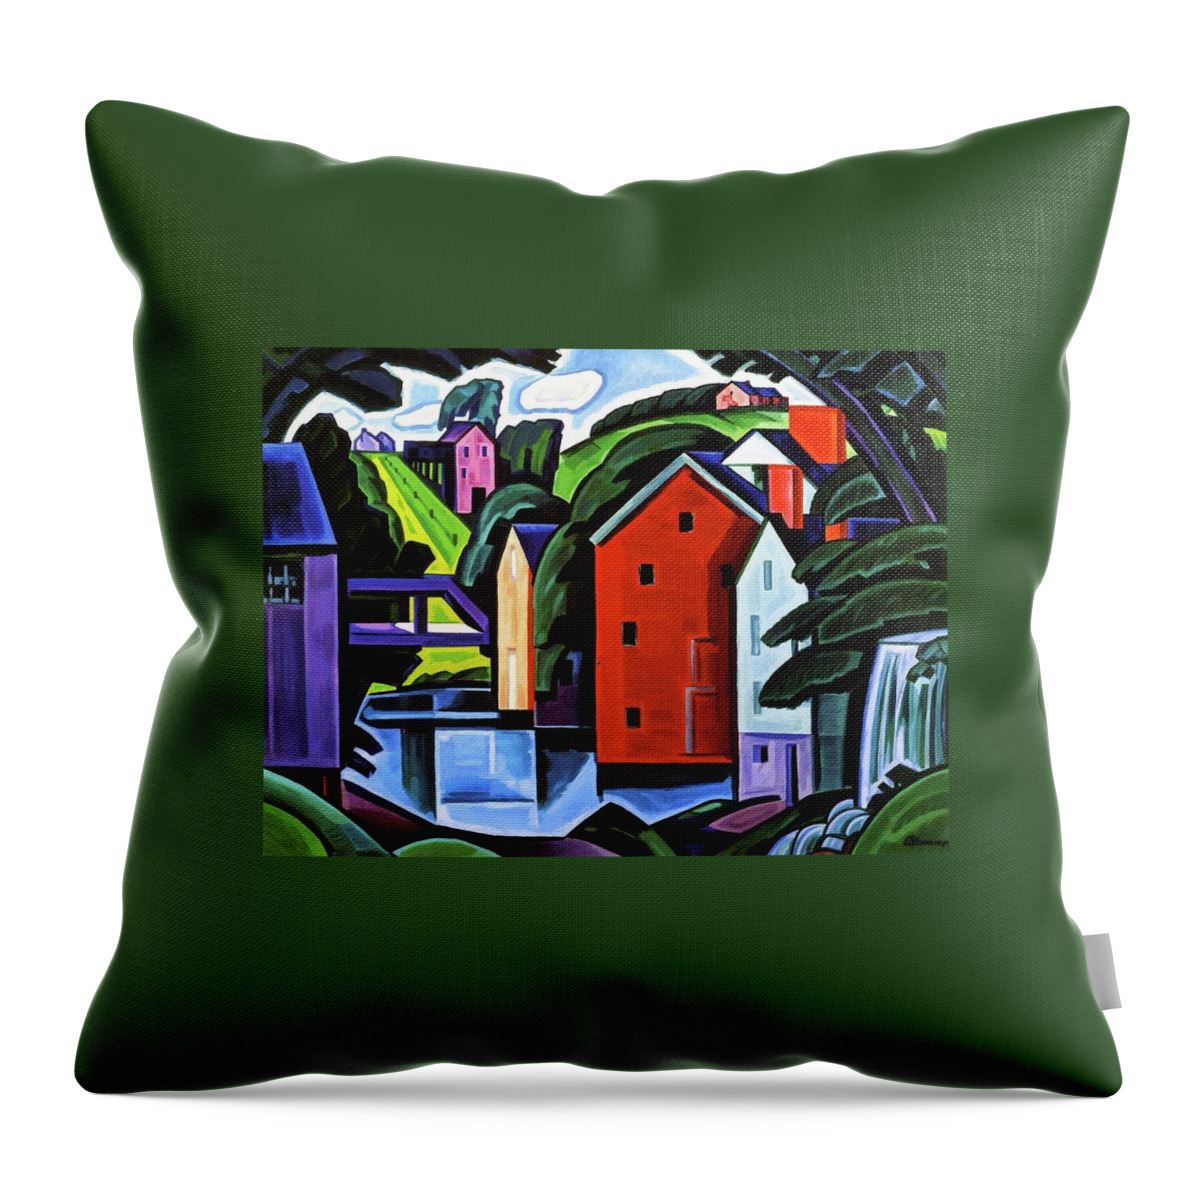 Oscar Bluemner Throw Pillow featuring the painting Abstract Landscape #1 by Oscar Bluemner